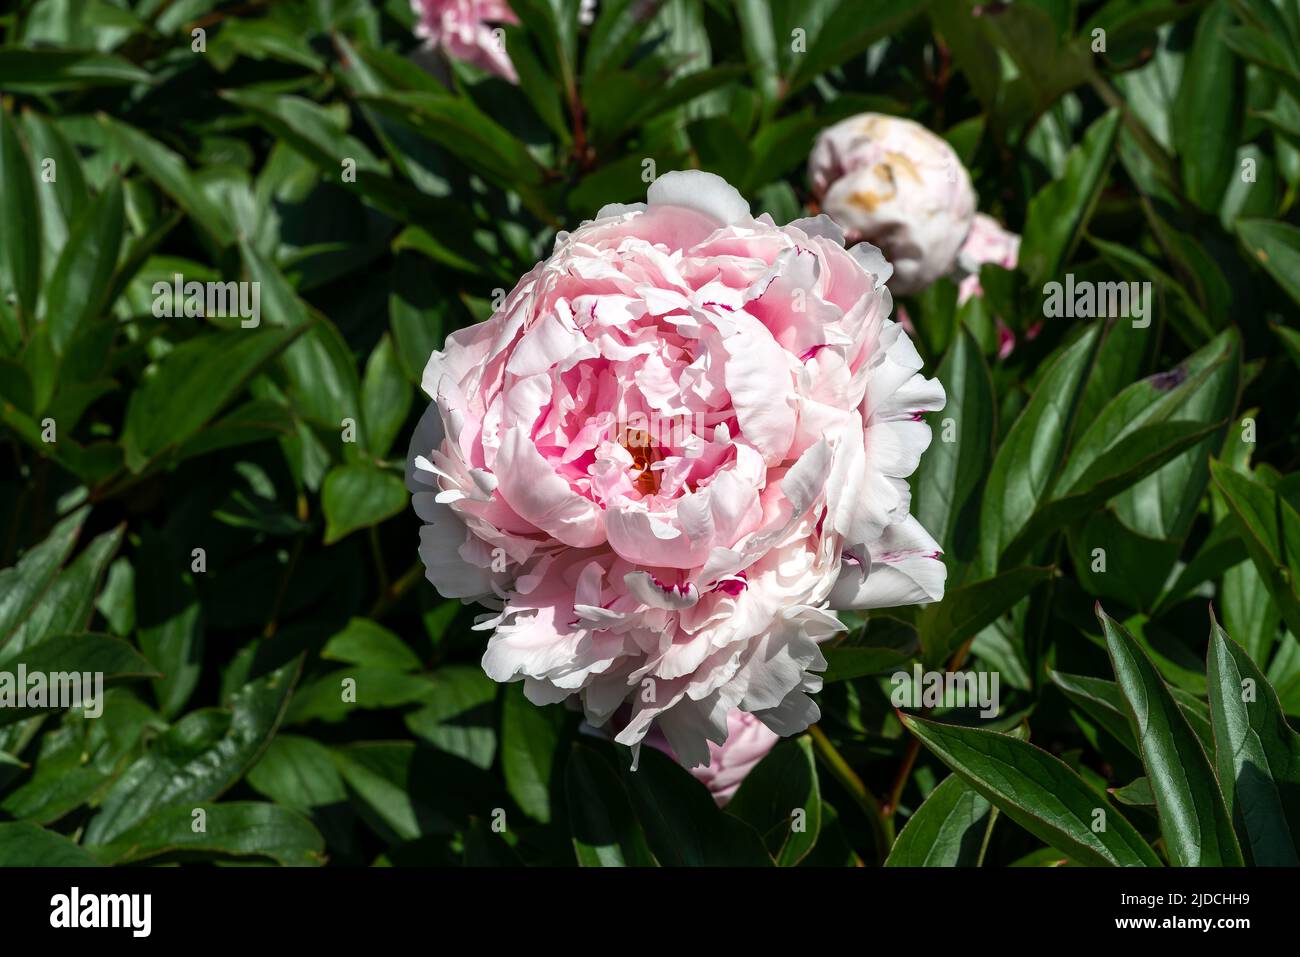 Peony (paeonia) a spring summer flowering plant with a white pink or red springtime flower, stock photo image Stock Photo